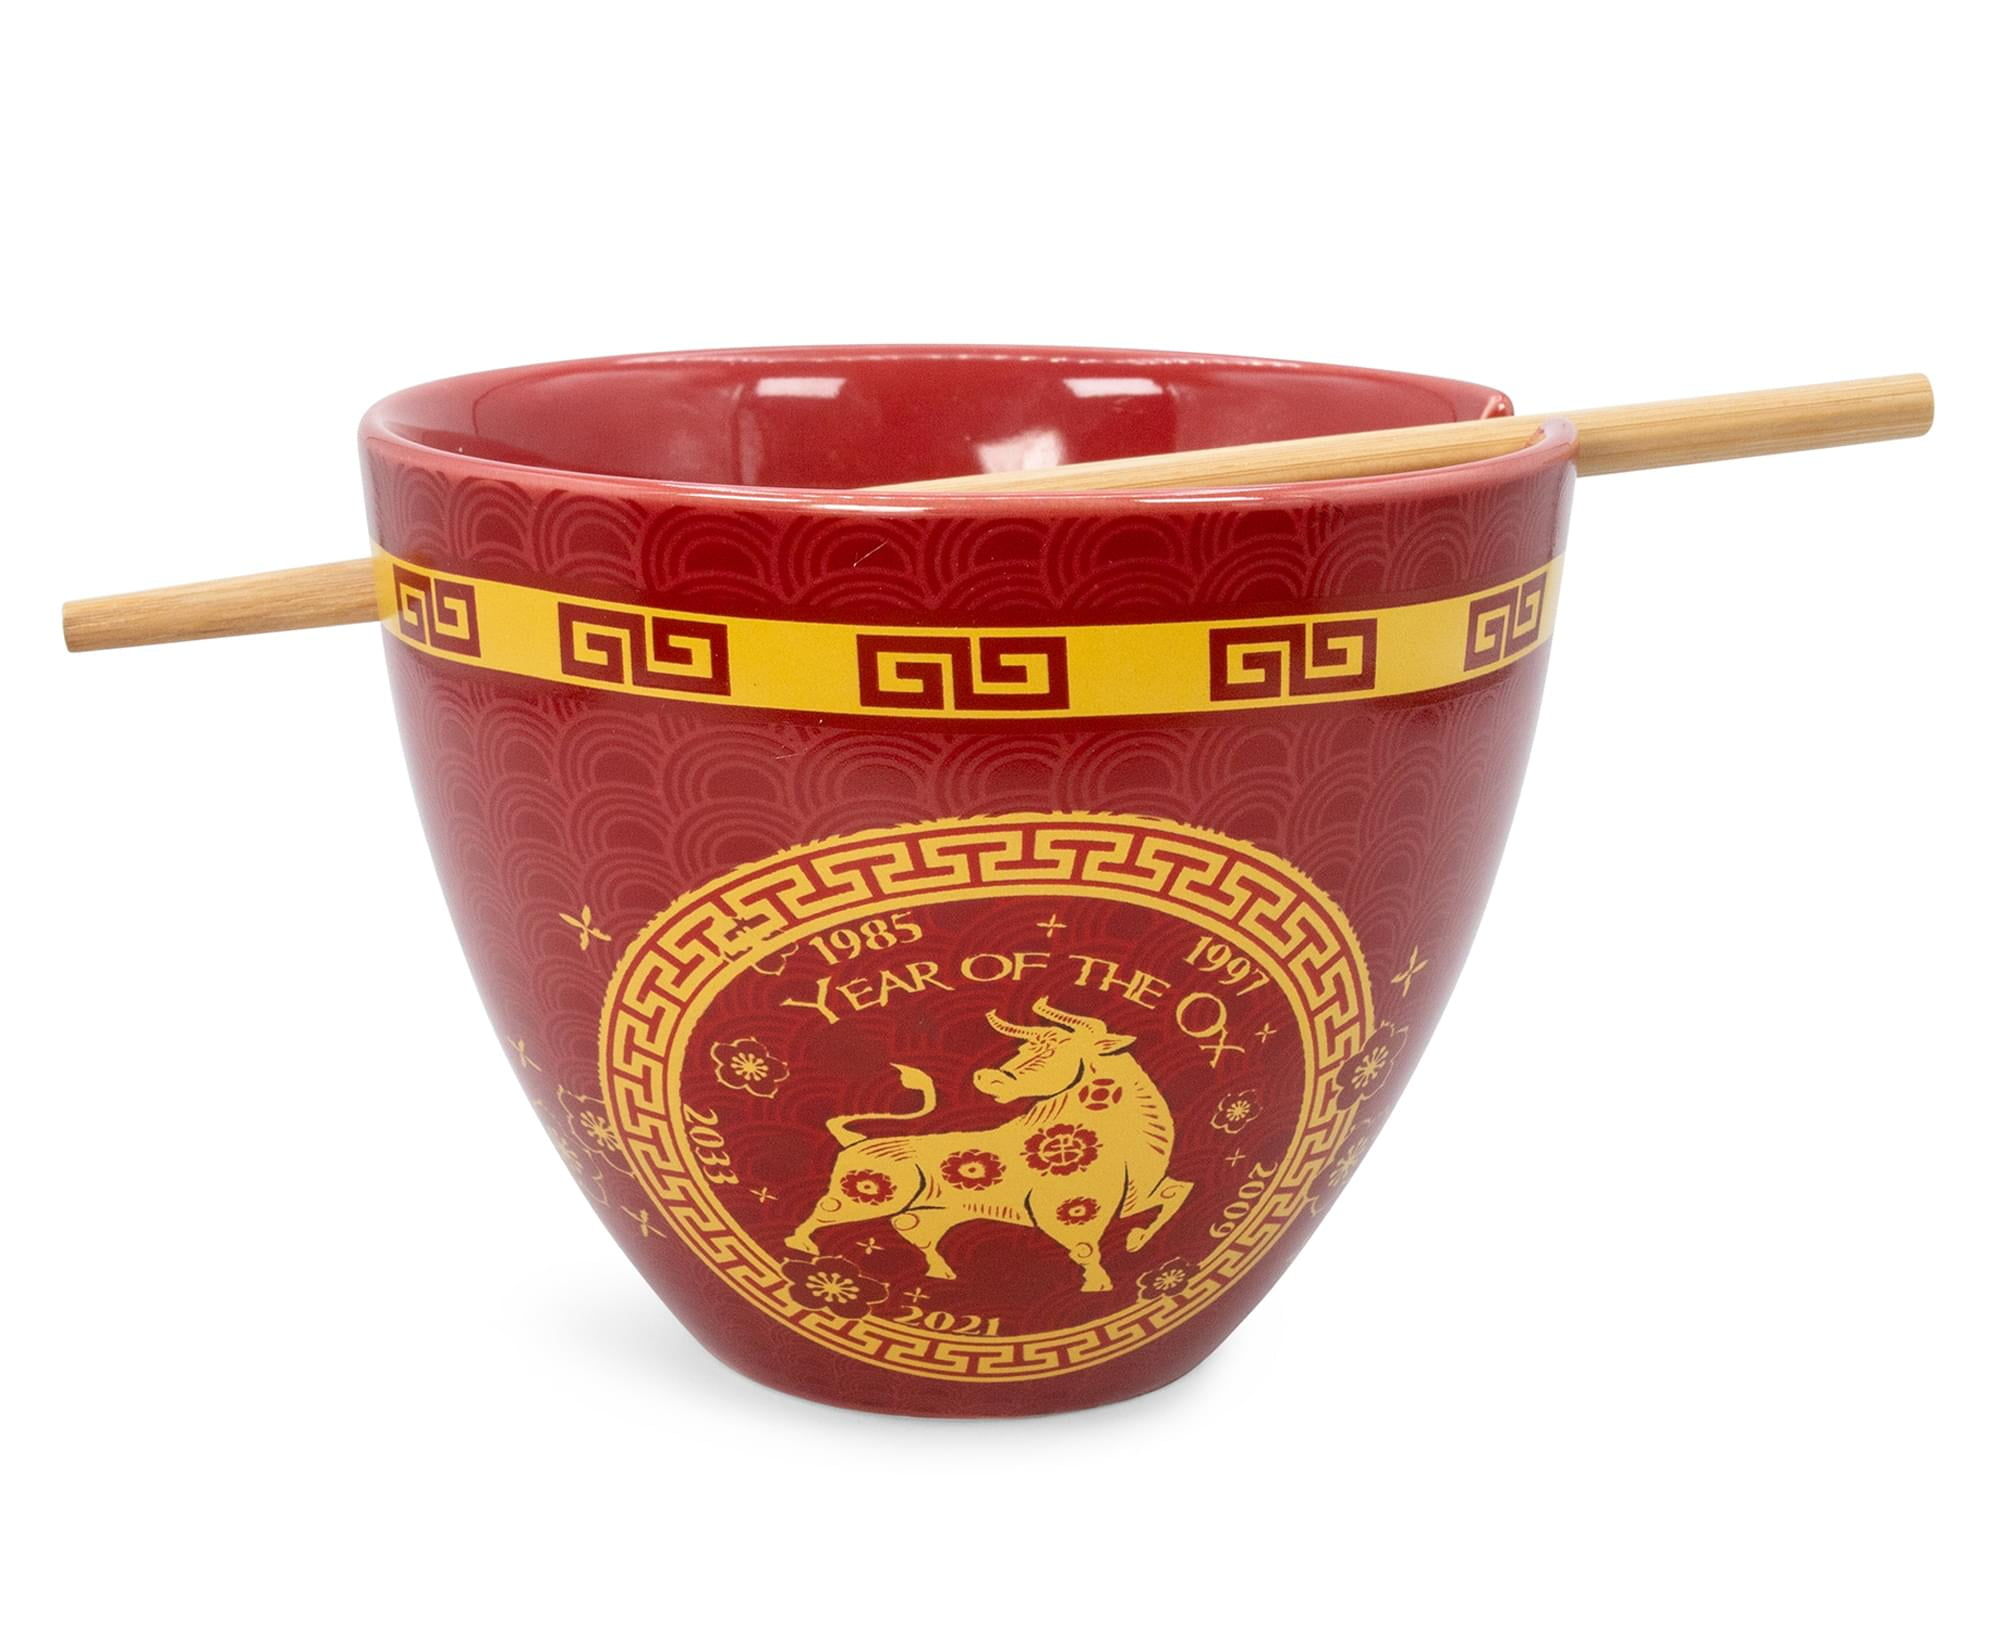 Chinese Symbol "Year of the Tiger" Ceramic shot glass FREE & FAST SHIPPING! 